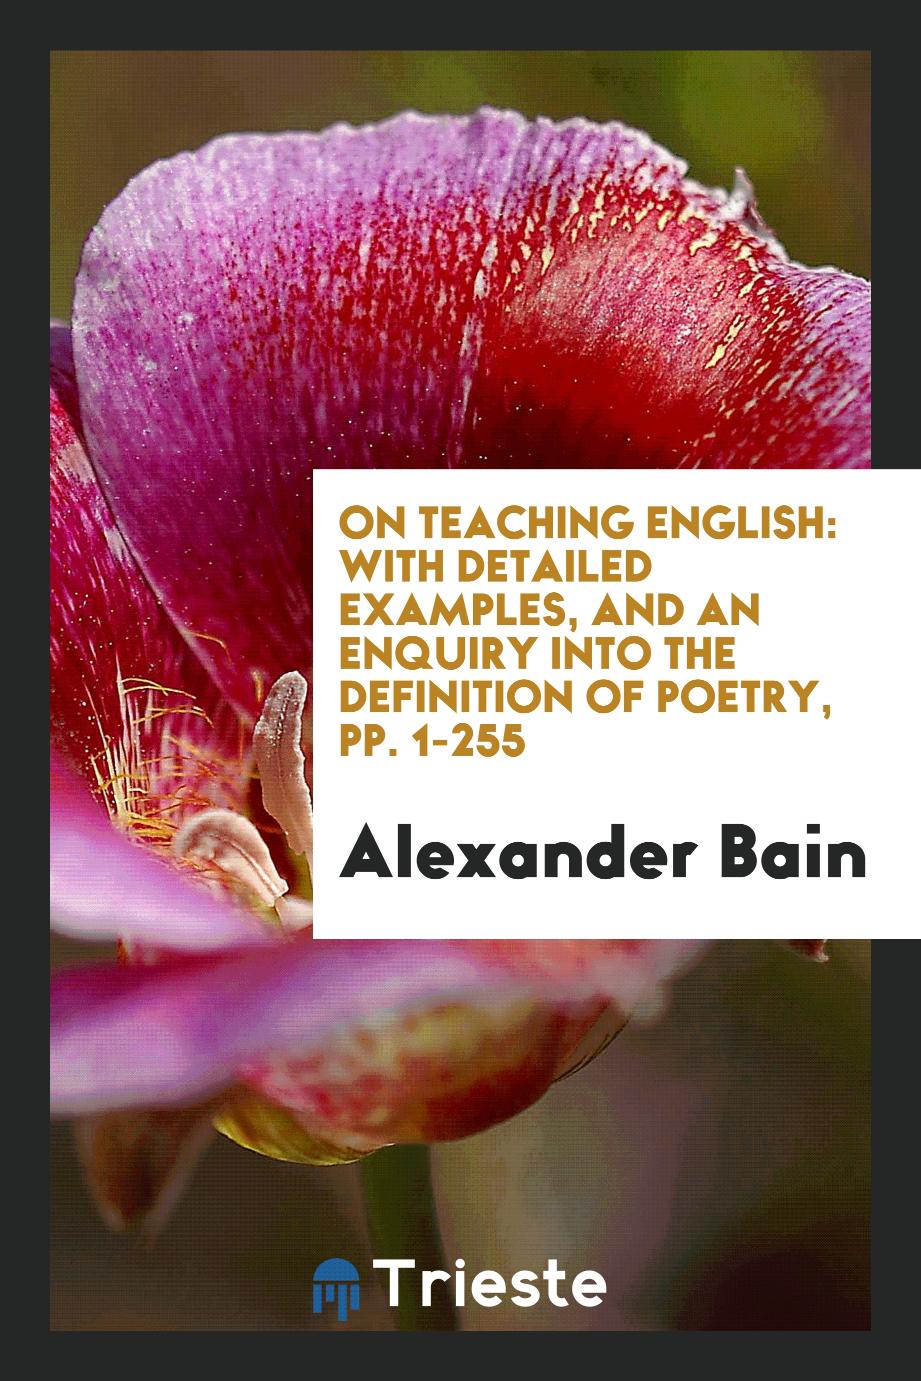 On Teaching English: With Detailed Examples, and an Enquiry Into the Definition of Poetry, pp. 1-255